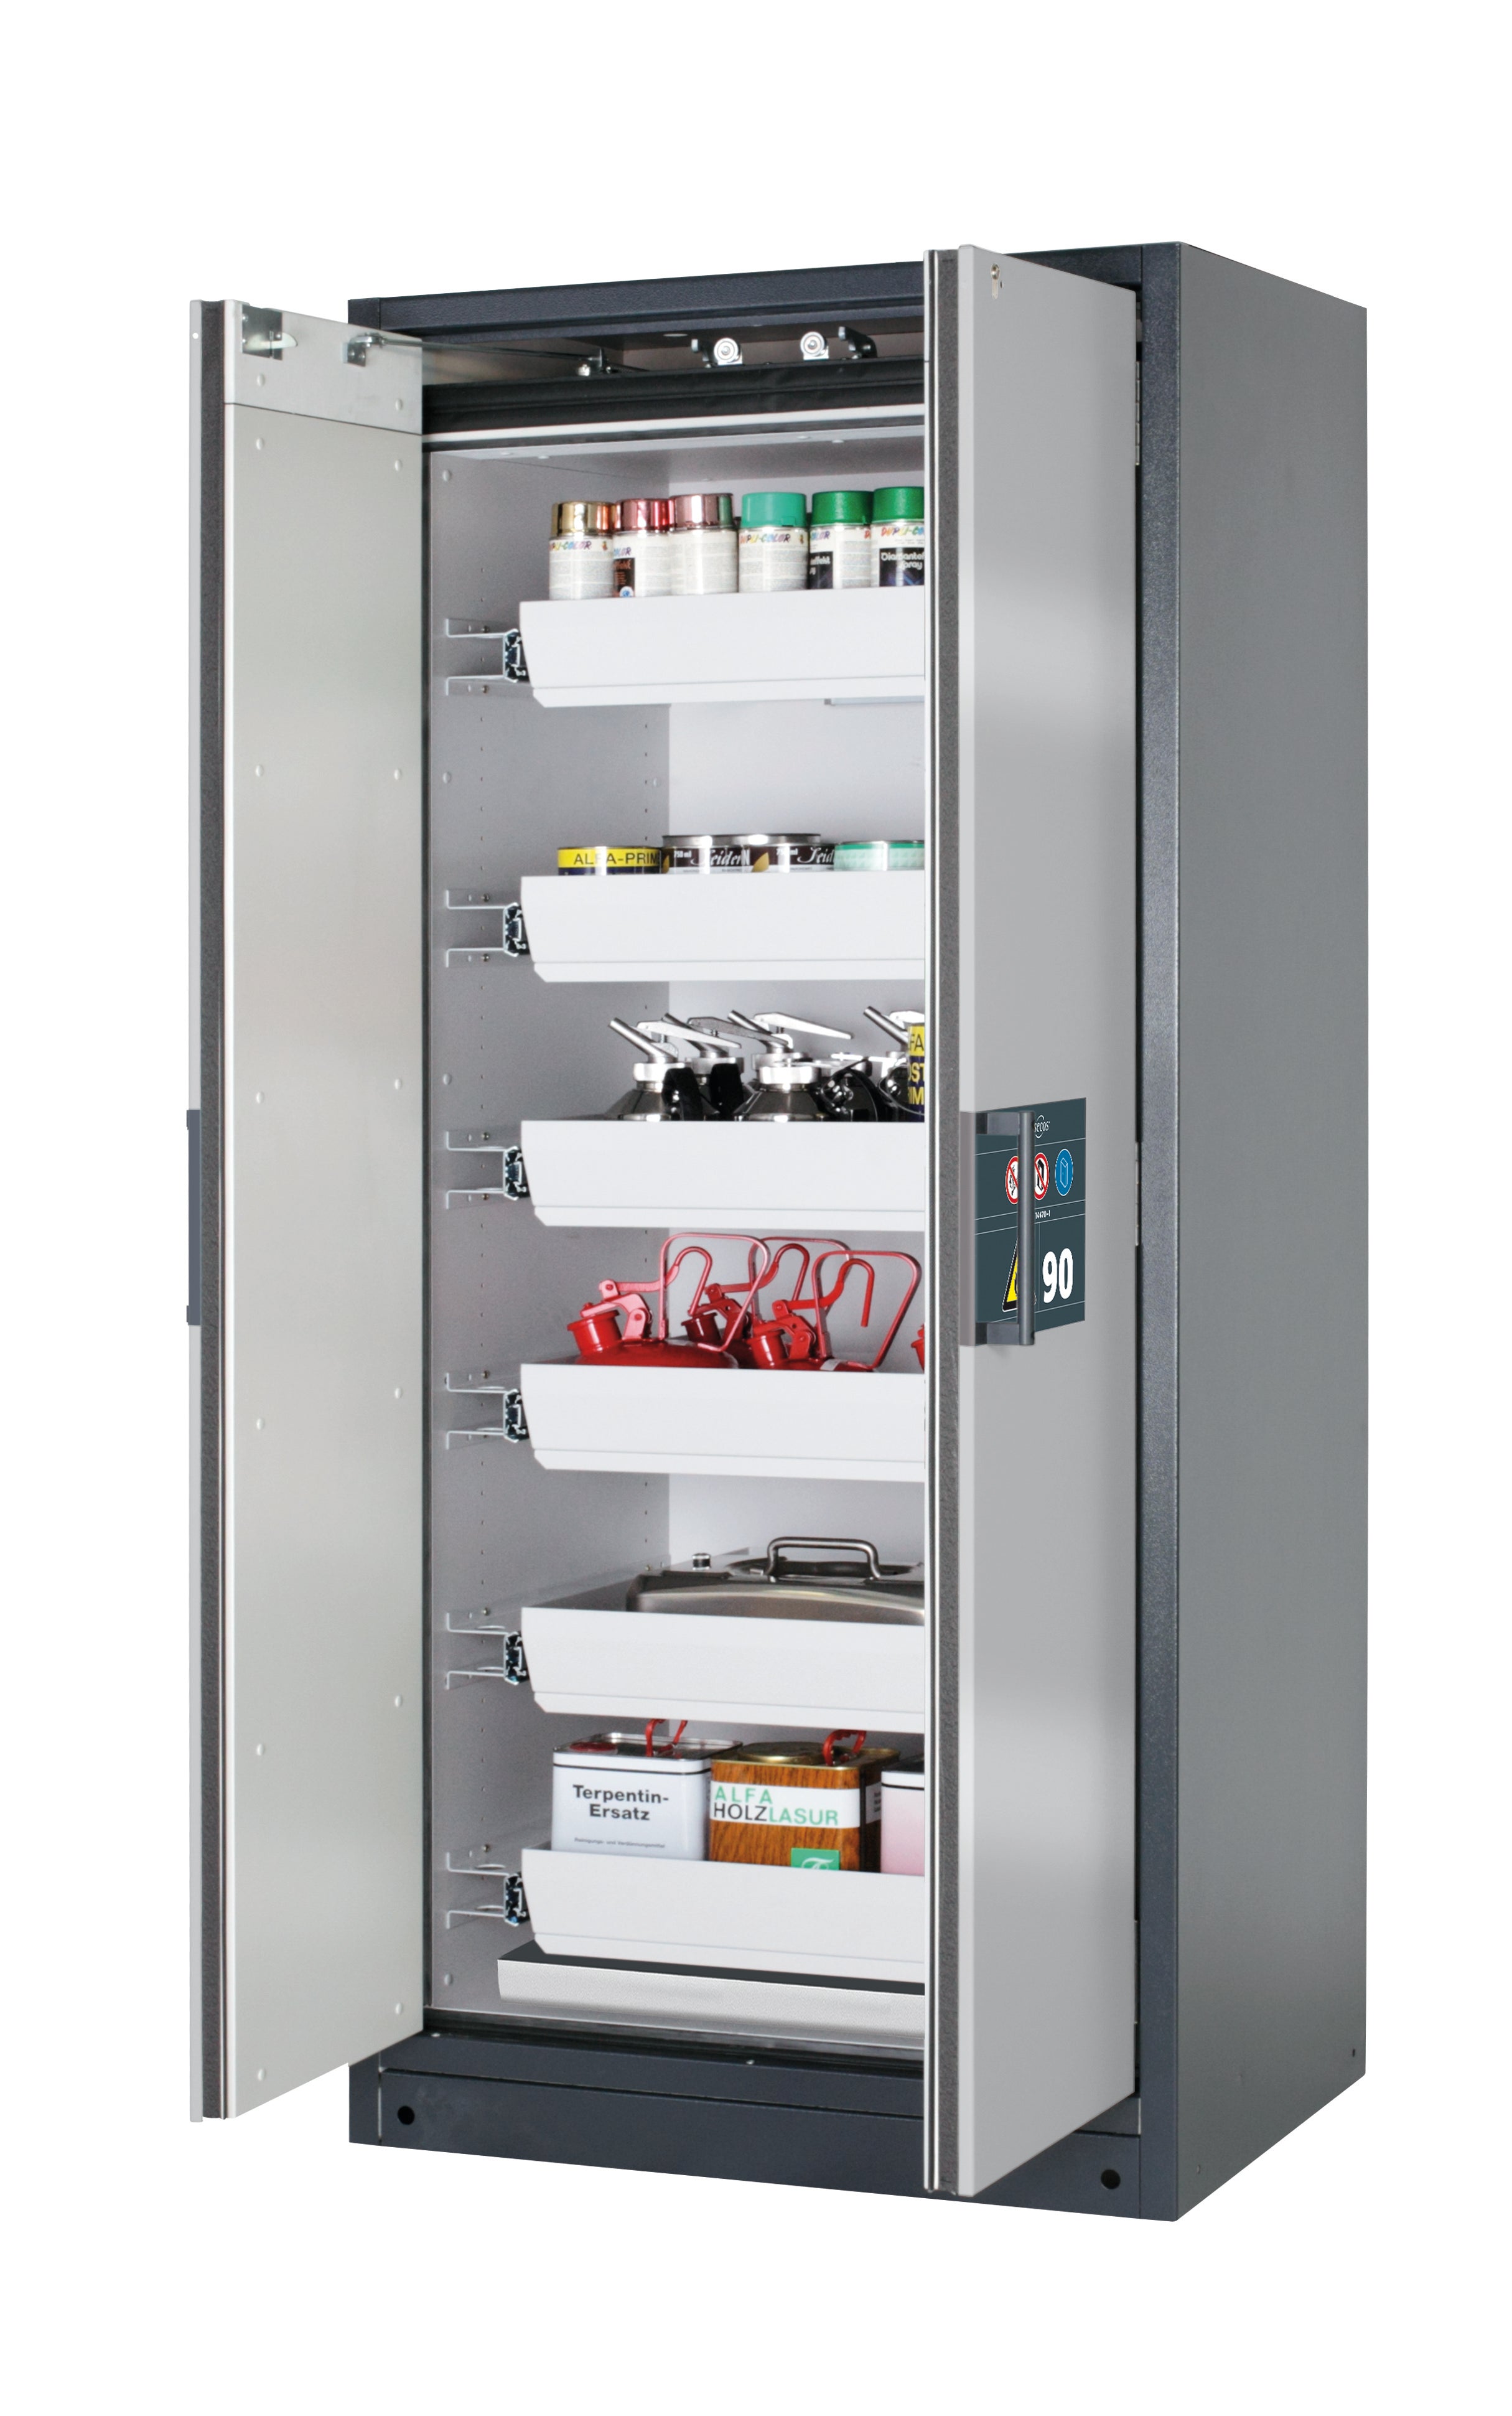 Type 90 safety storage cabinet Q-PEGASUS-90 model Q90.195.090.WDAC in asecos silver with 6x drawer (standard) (sheet steel),